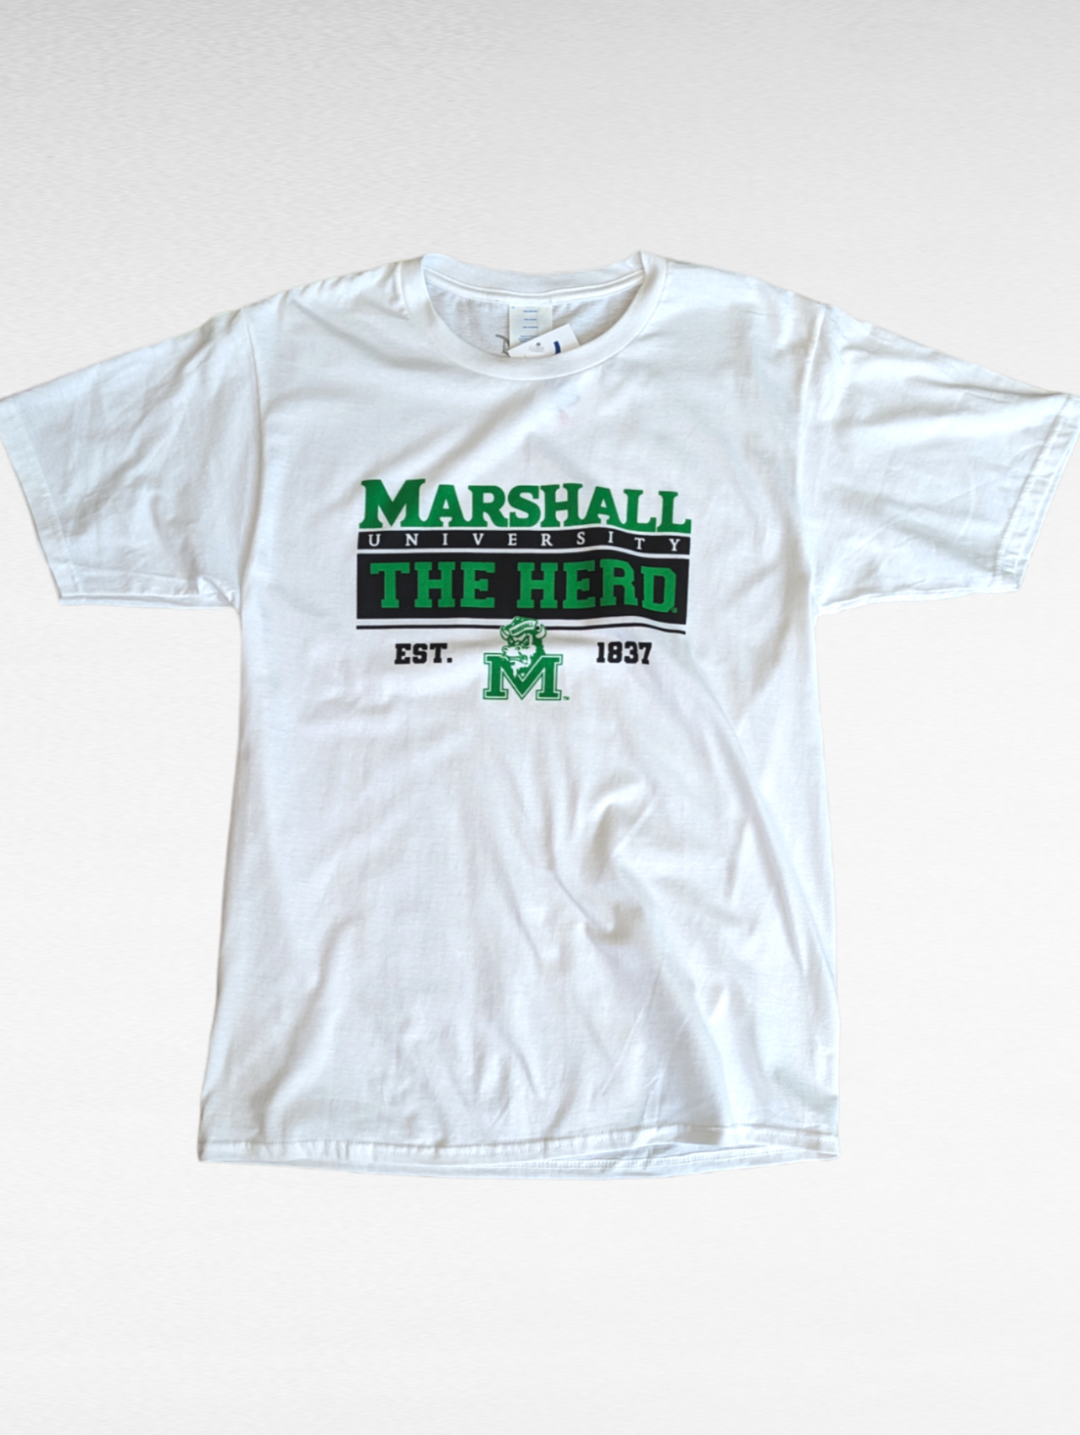 the fan fave tee is white with a green marshall over a black university bar over a green and black the herd bar over snorting sailor marco